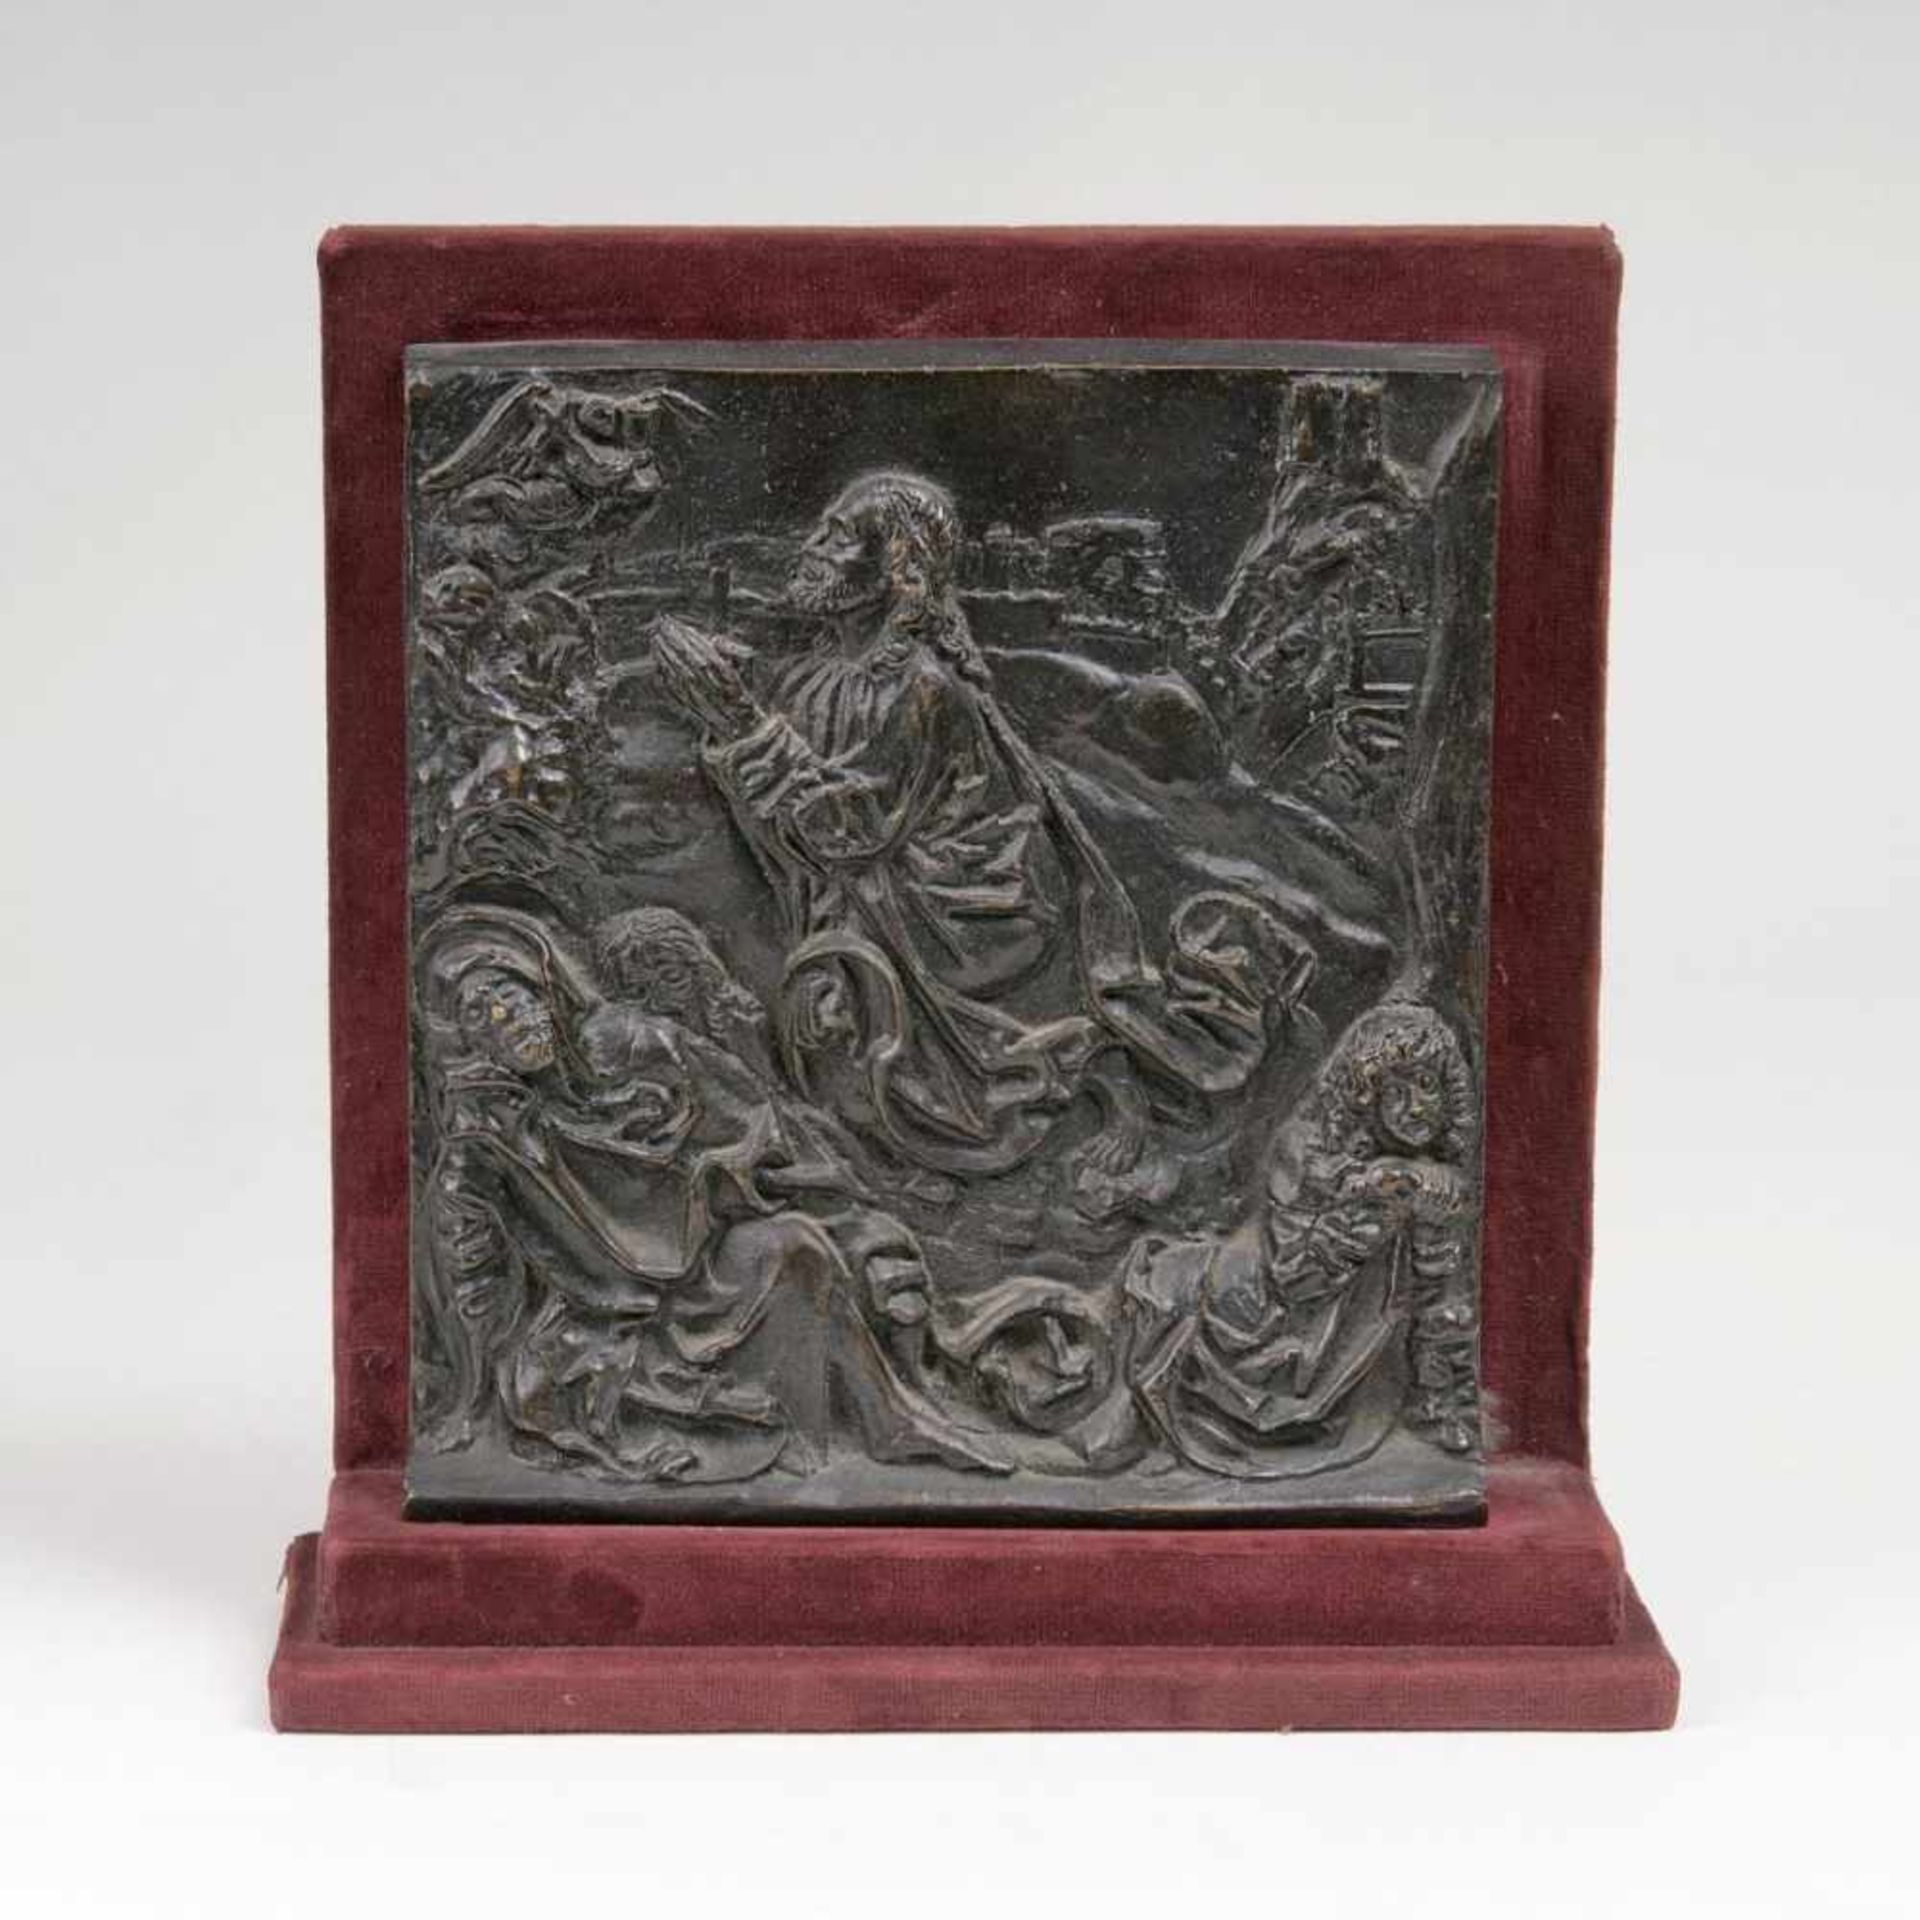 A Relief 'Christ on the Mount of Olives'Nuremberg, 16th cent. Bronze with black-green patina. 22 x